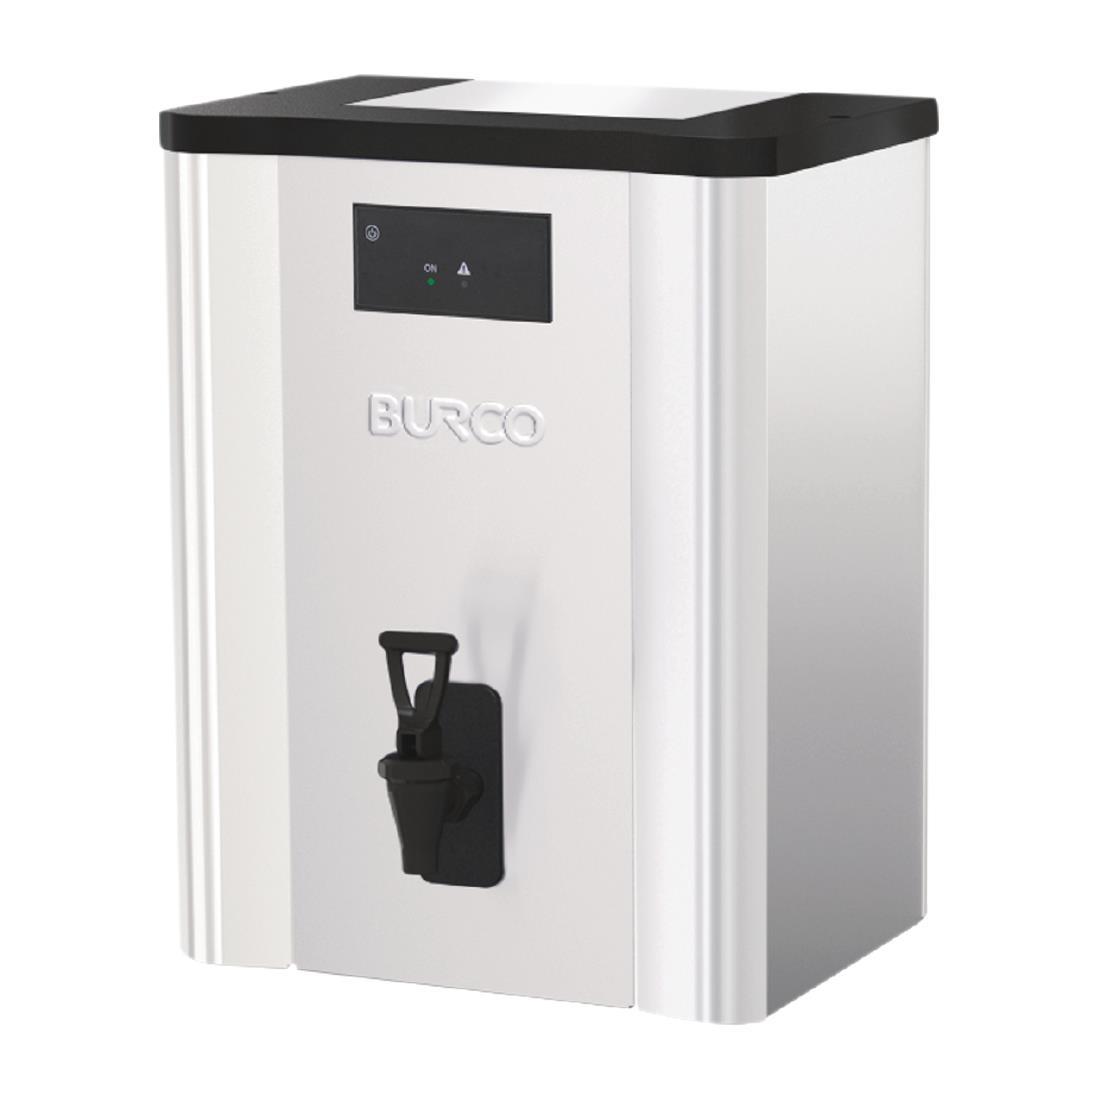 Burco 3Ltr Auto Fill Wall Mounted Water Boiler 069924 - DY431  - 1